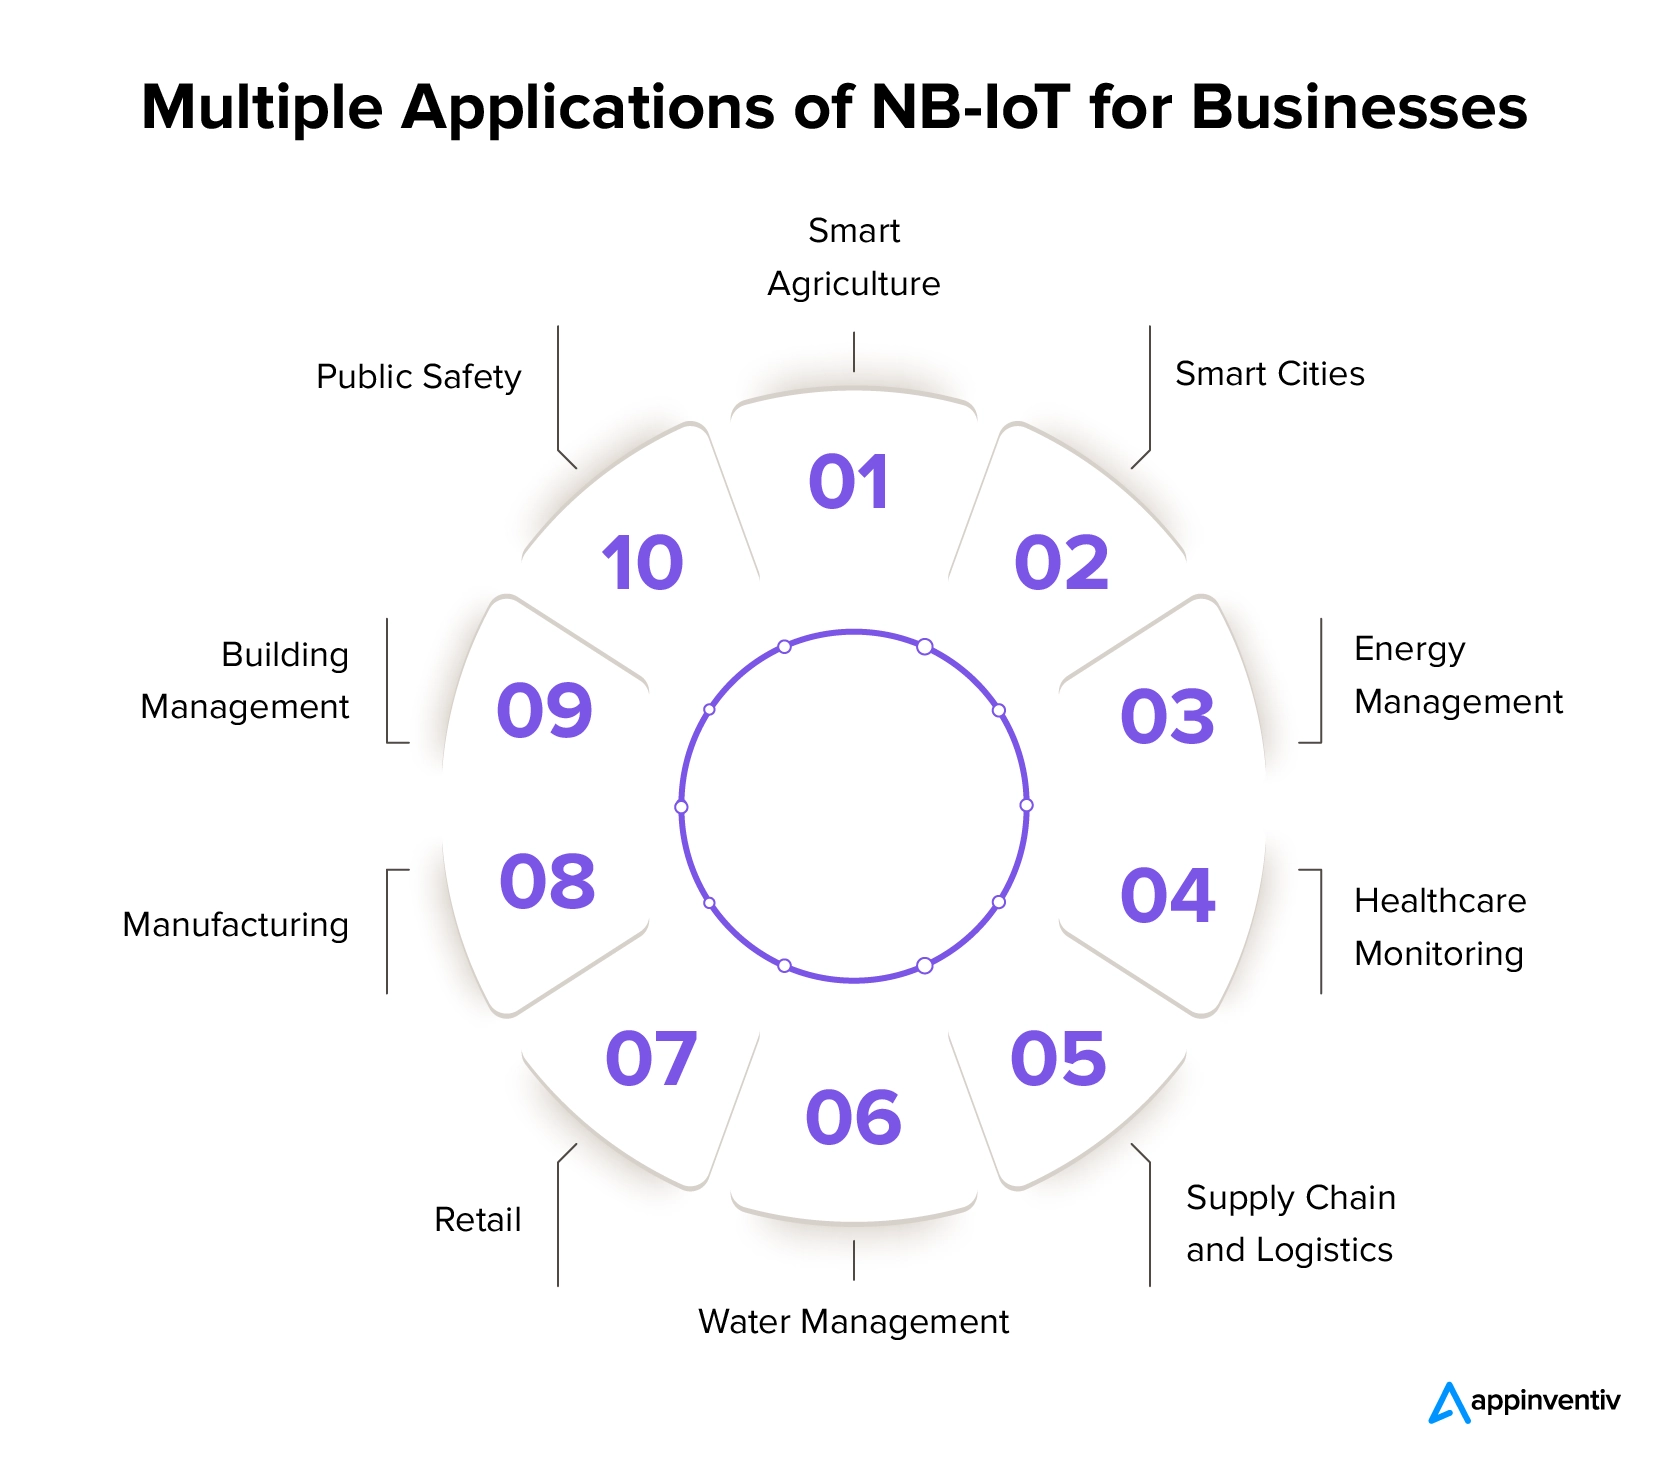 Multiple Applications of NB-IoT for Businesses